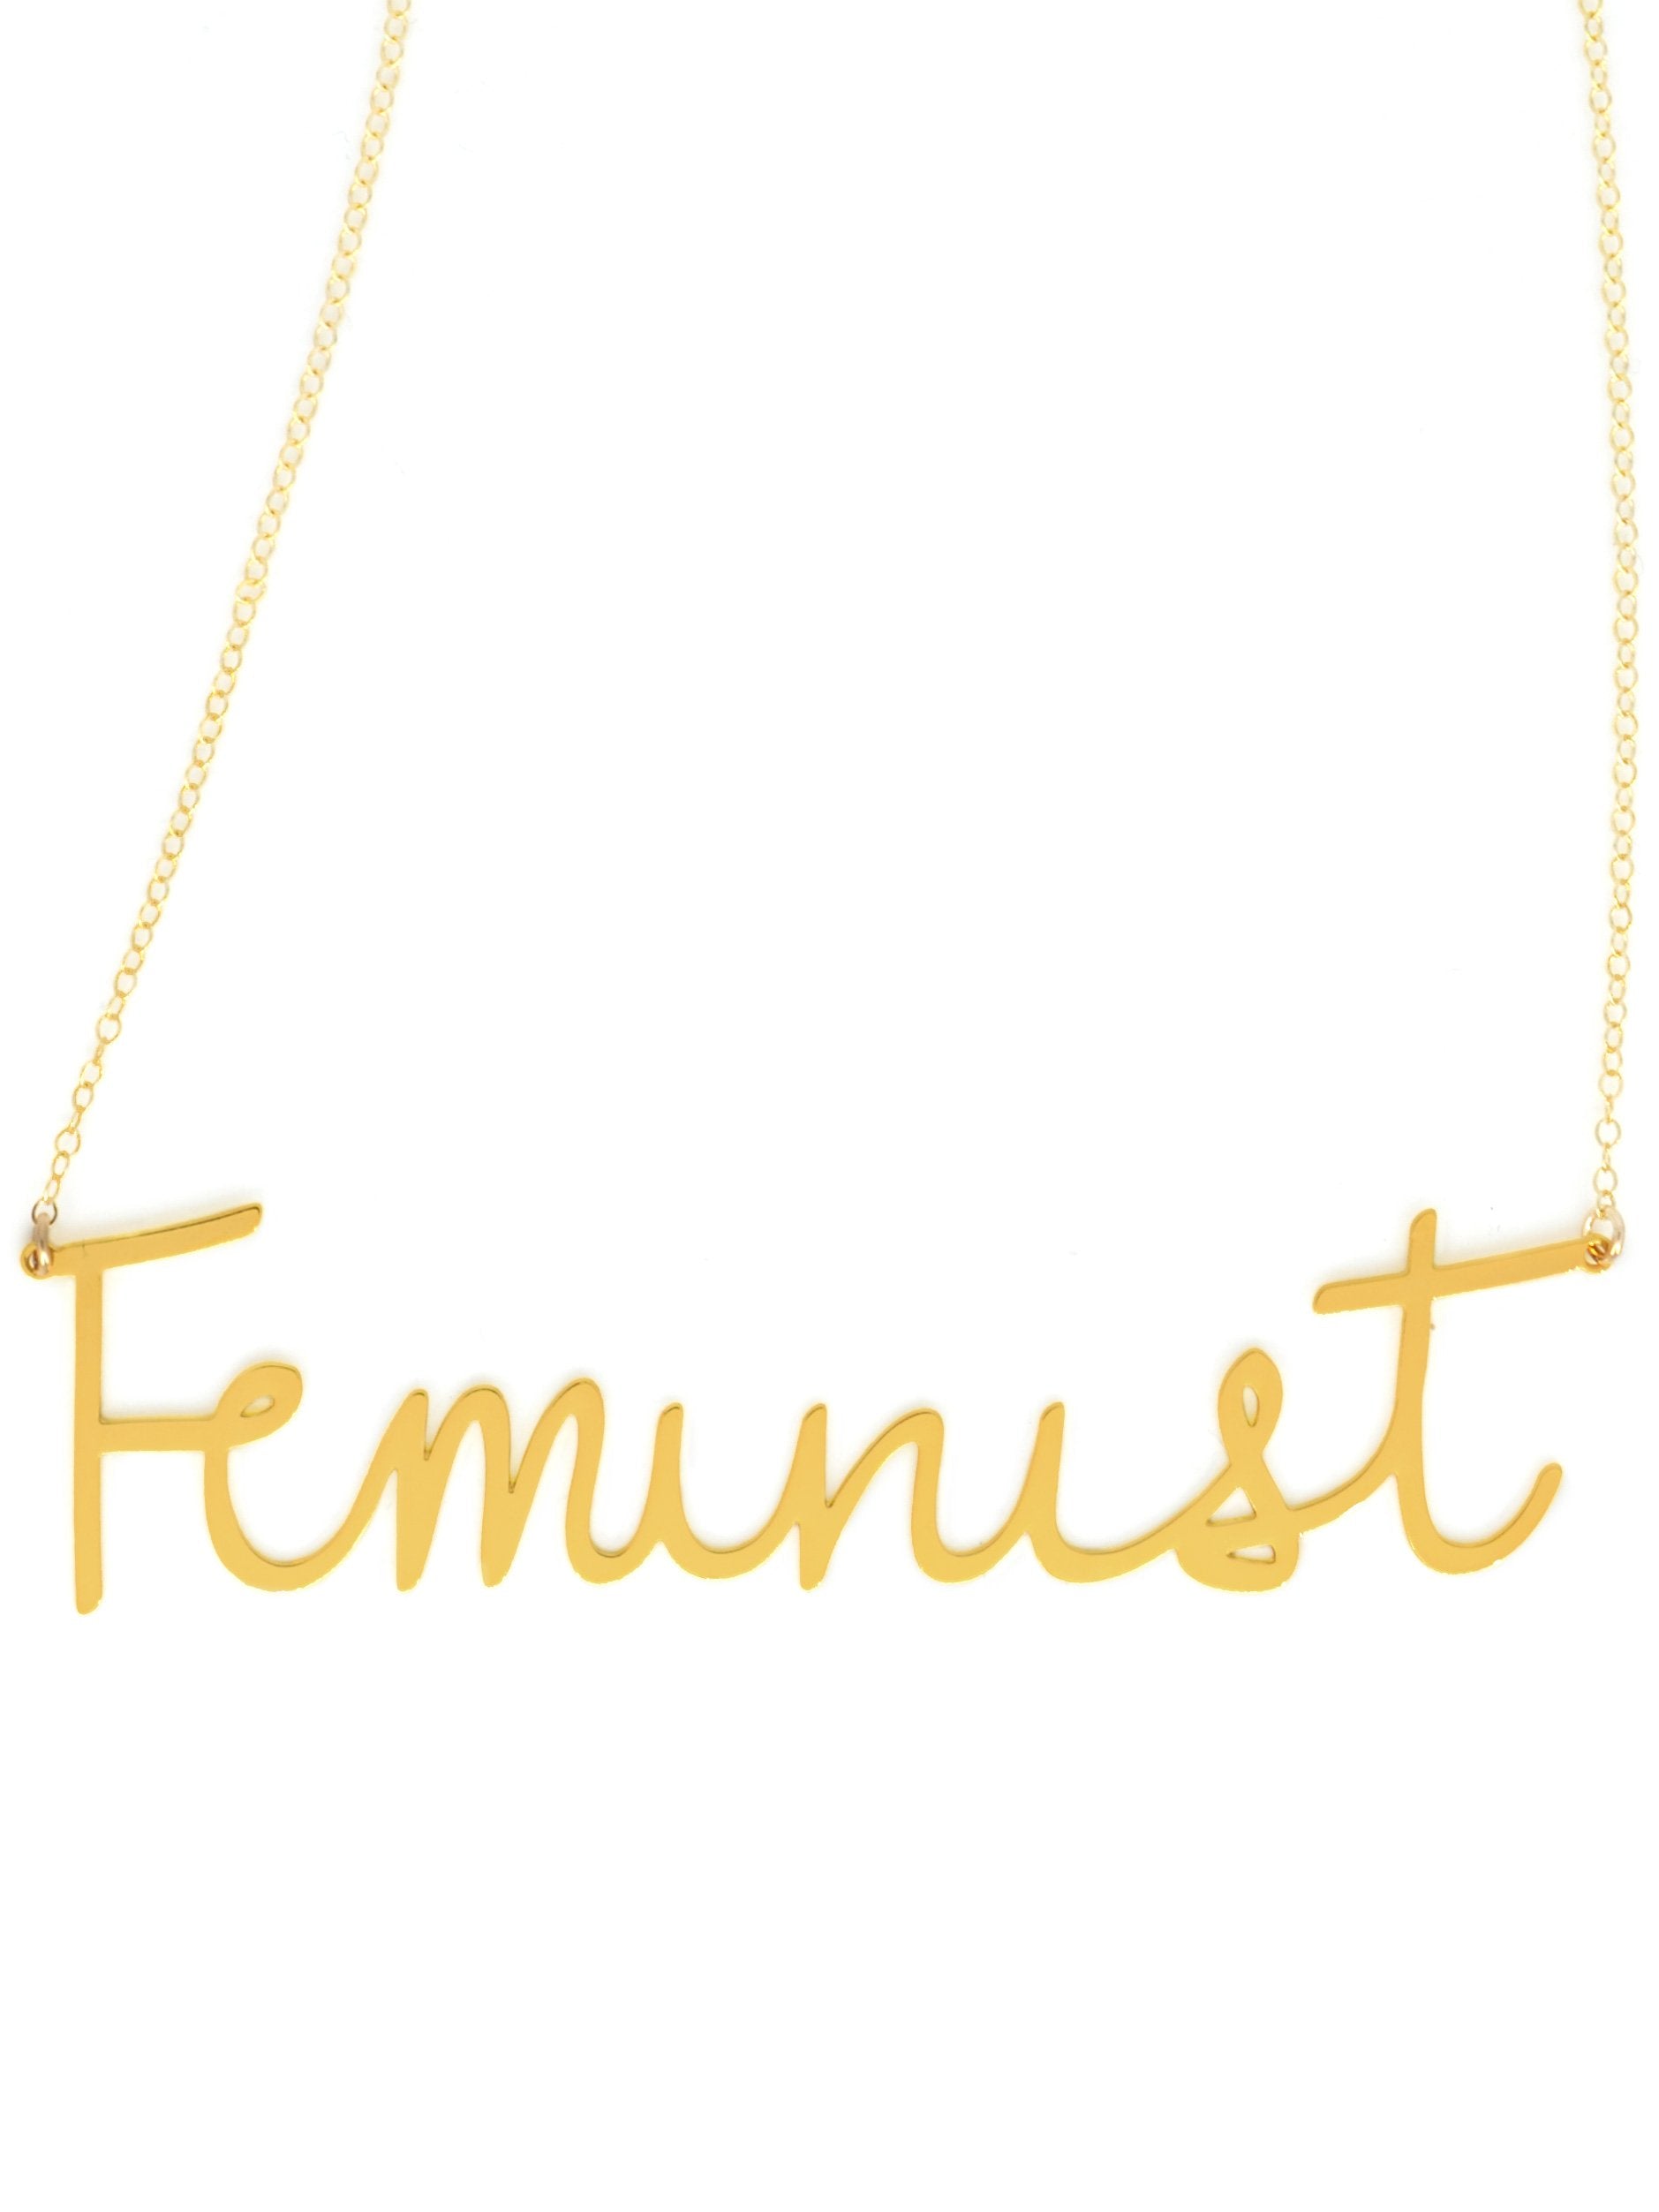 Feminist Necklace - High Quality, Affordable, Hand Written, Empowering, Self Love, Mantra Word Necklace - Available in Gold and Silver - Small and Large Sizes - Made in USA - Brevity Jewelry